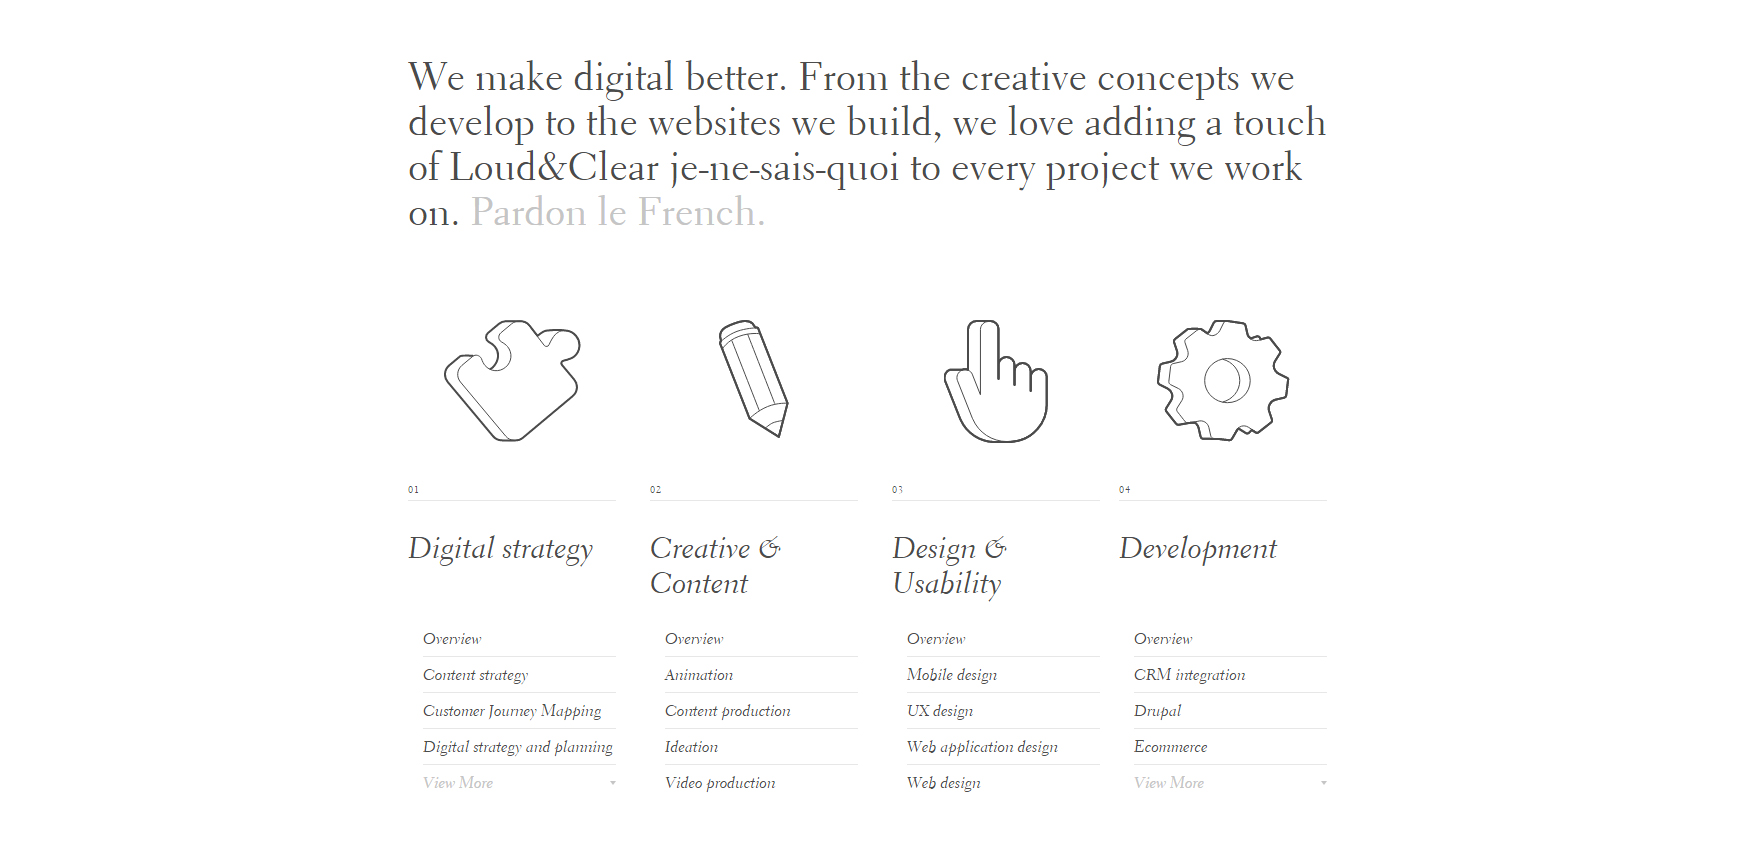 Loud&Clear - Website of the Day